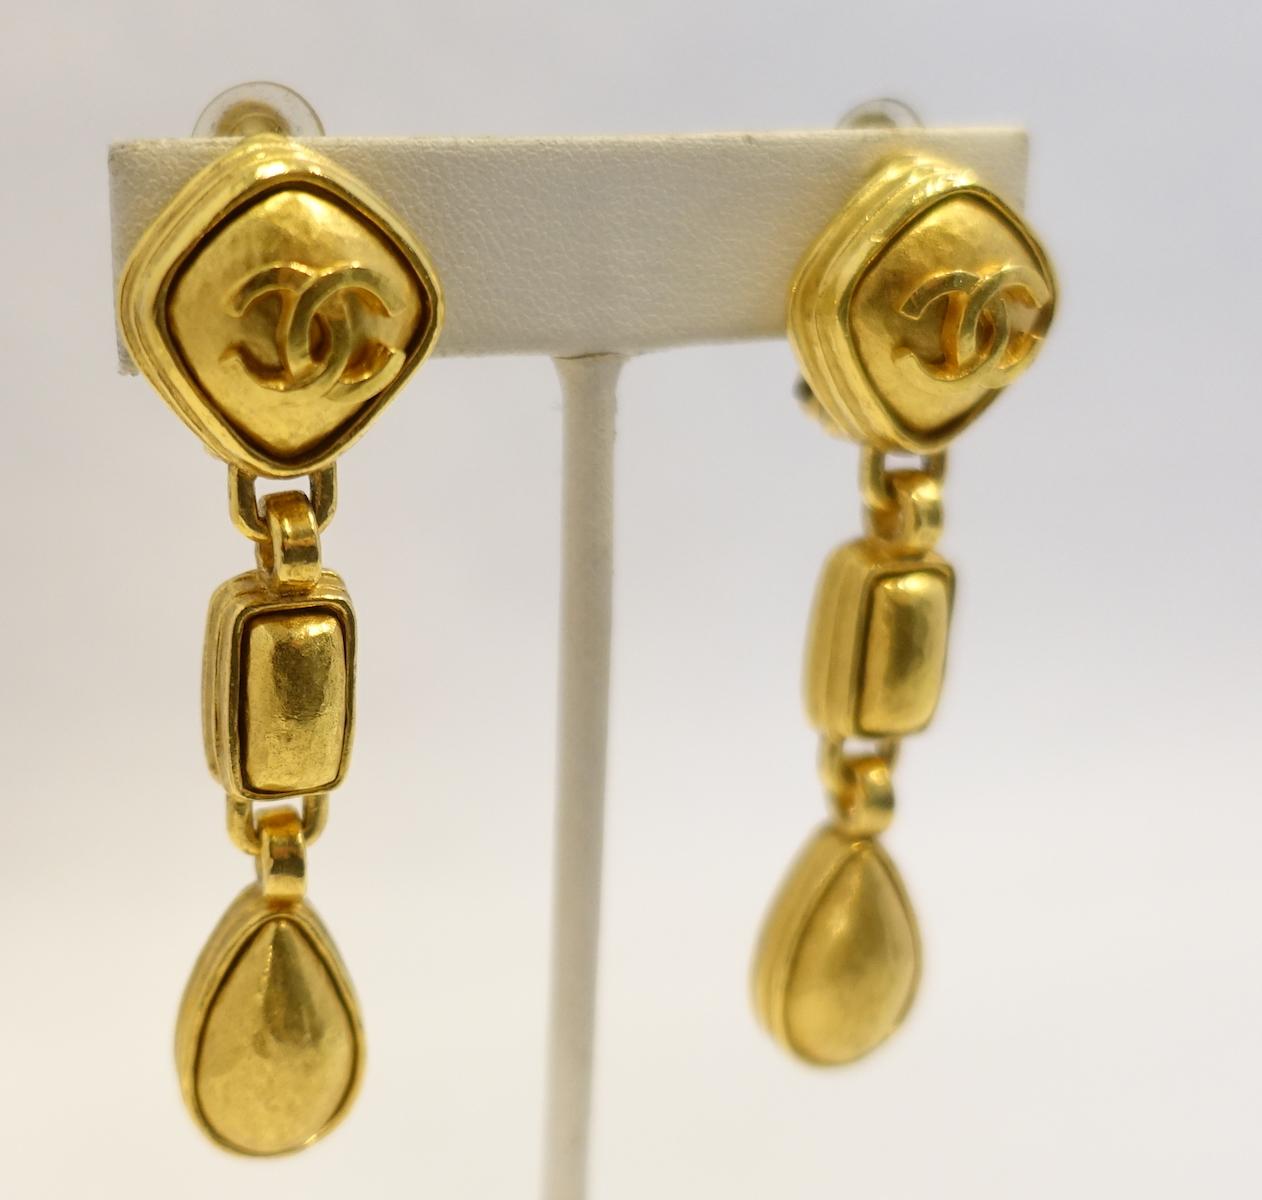 These vintage Chanel dangling earrings have a gold tone triangular top with the double “Cs” in the center. Hanging down are 2 more links … one rectangular shape and then tear drops. These clip earrings measure 2-1/2” x 3/4” and are signed “Chanel